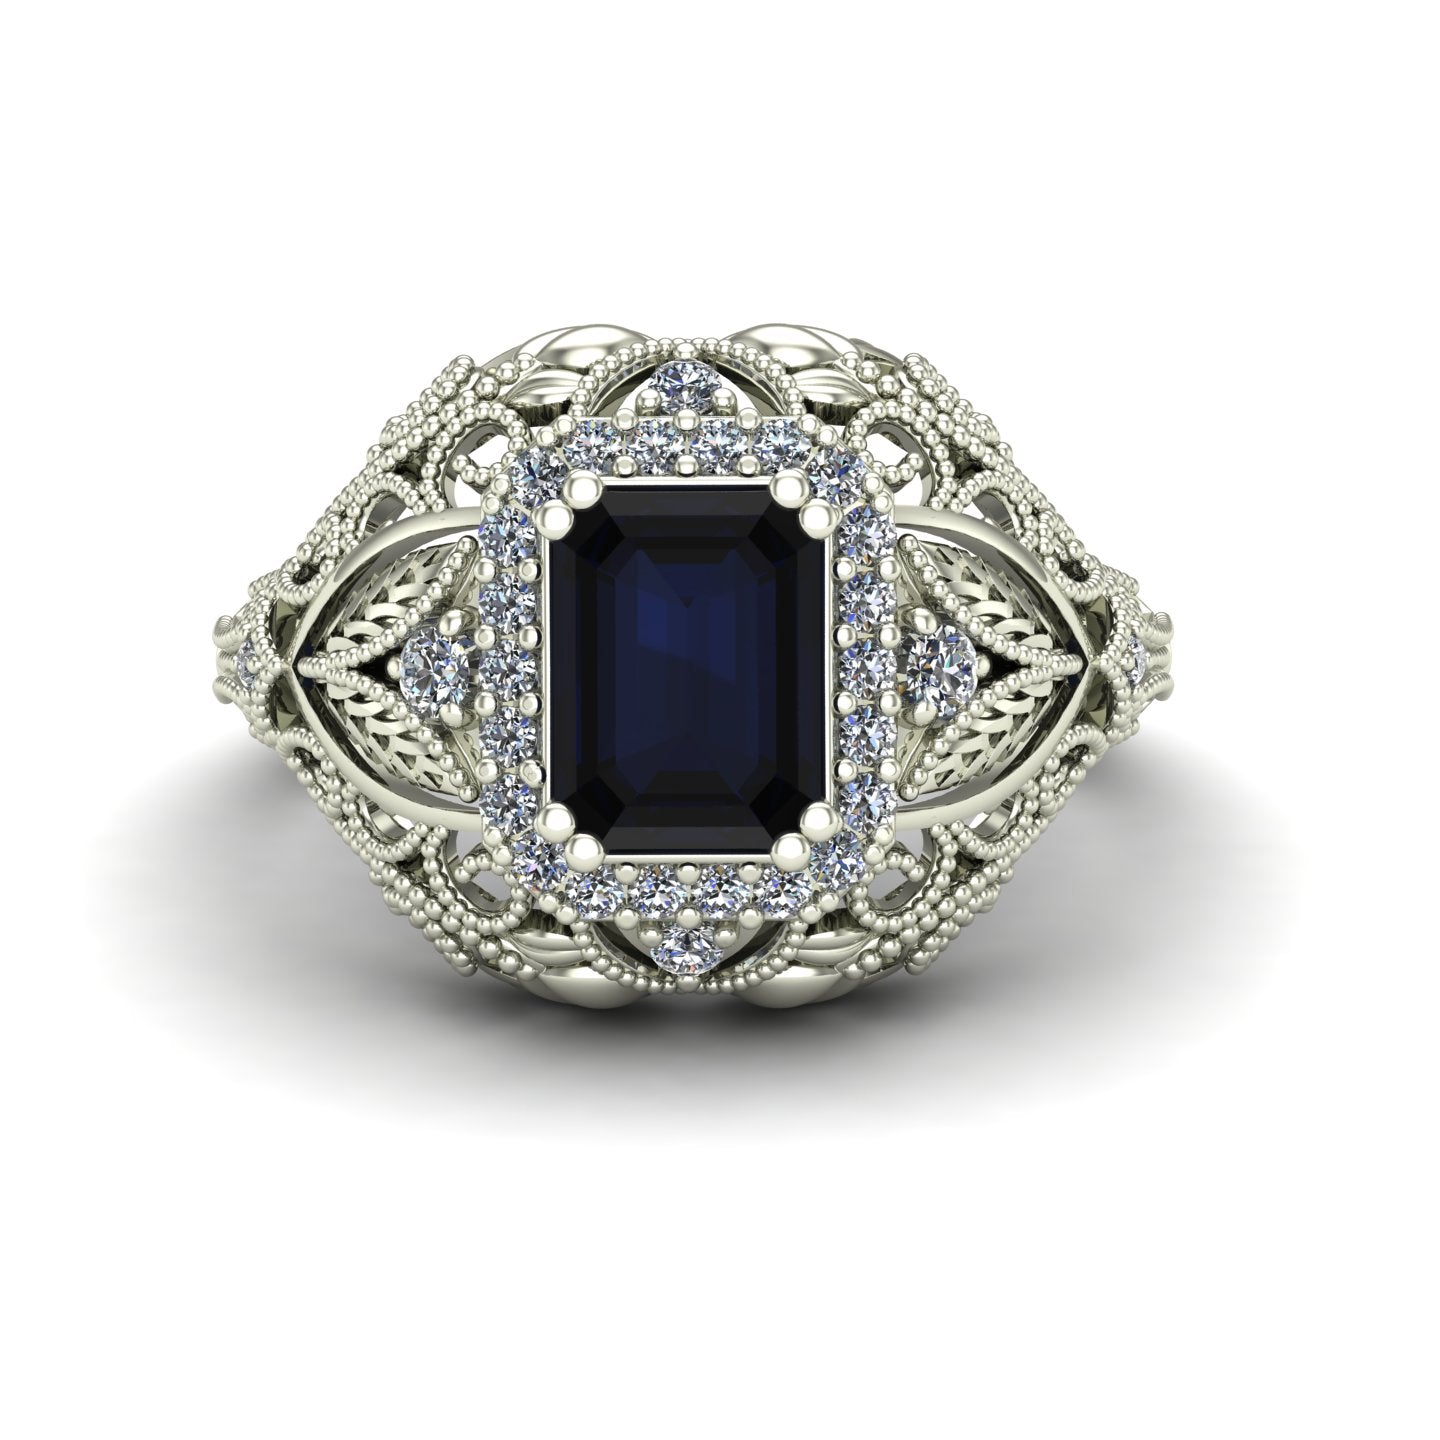 emerald cut blue sapphire and diamond ring with leaves in 14k white gold - Charles Babb Designs - top view